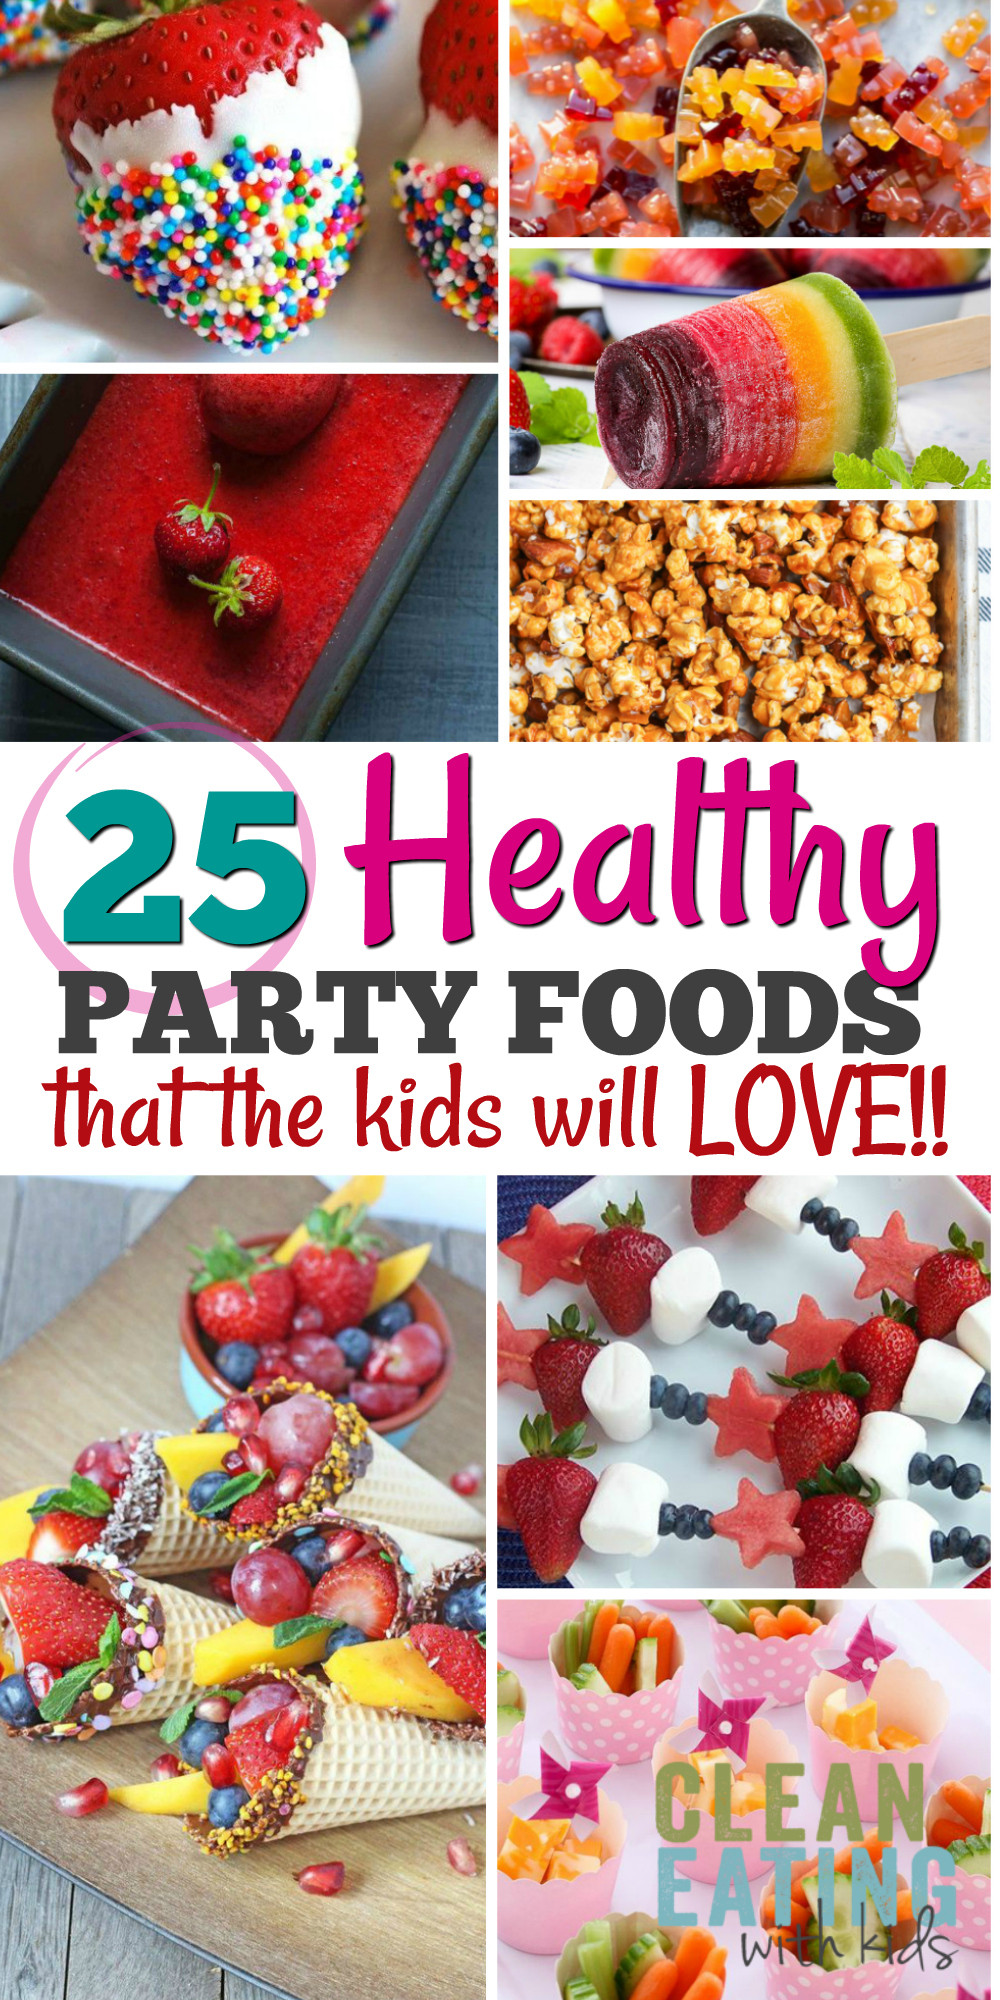 Cool Party Food Ideas
 25 Healthy Birthday Party Food Ideas Clean Eating with kids